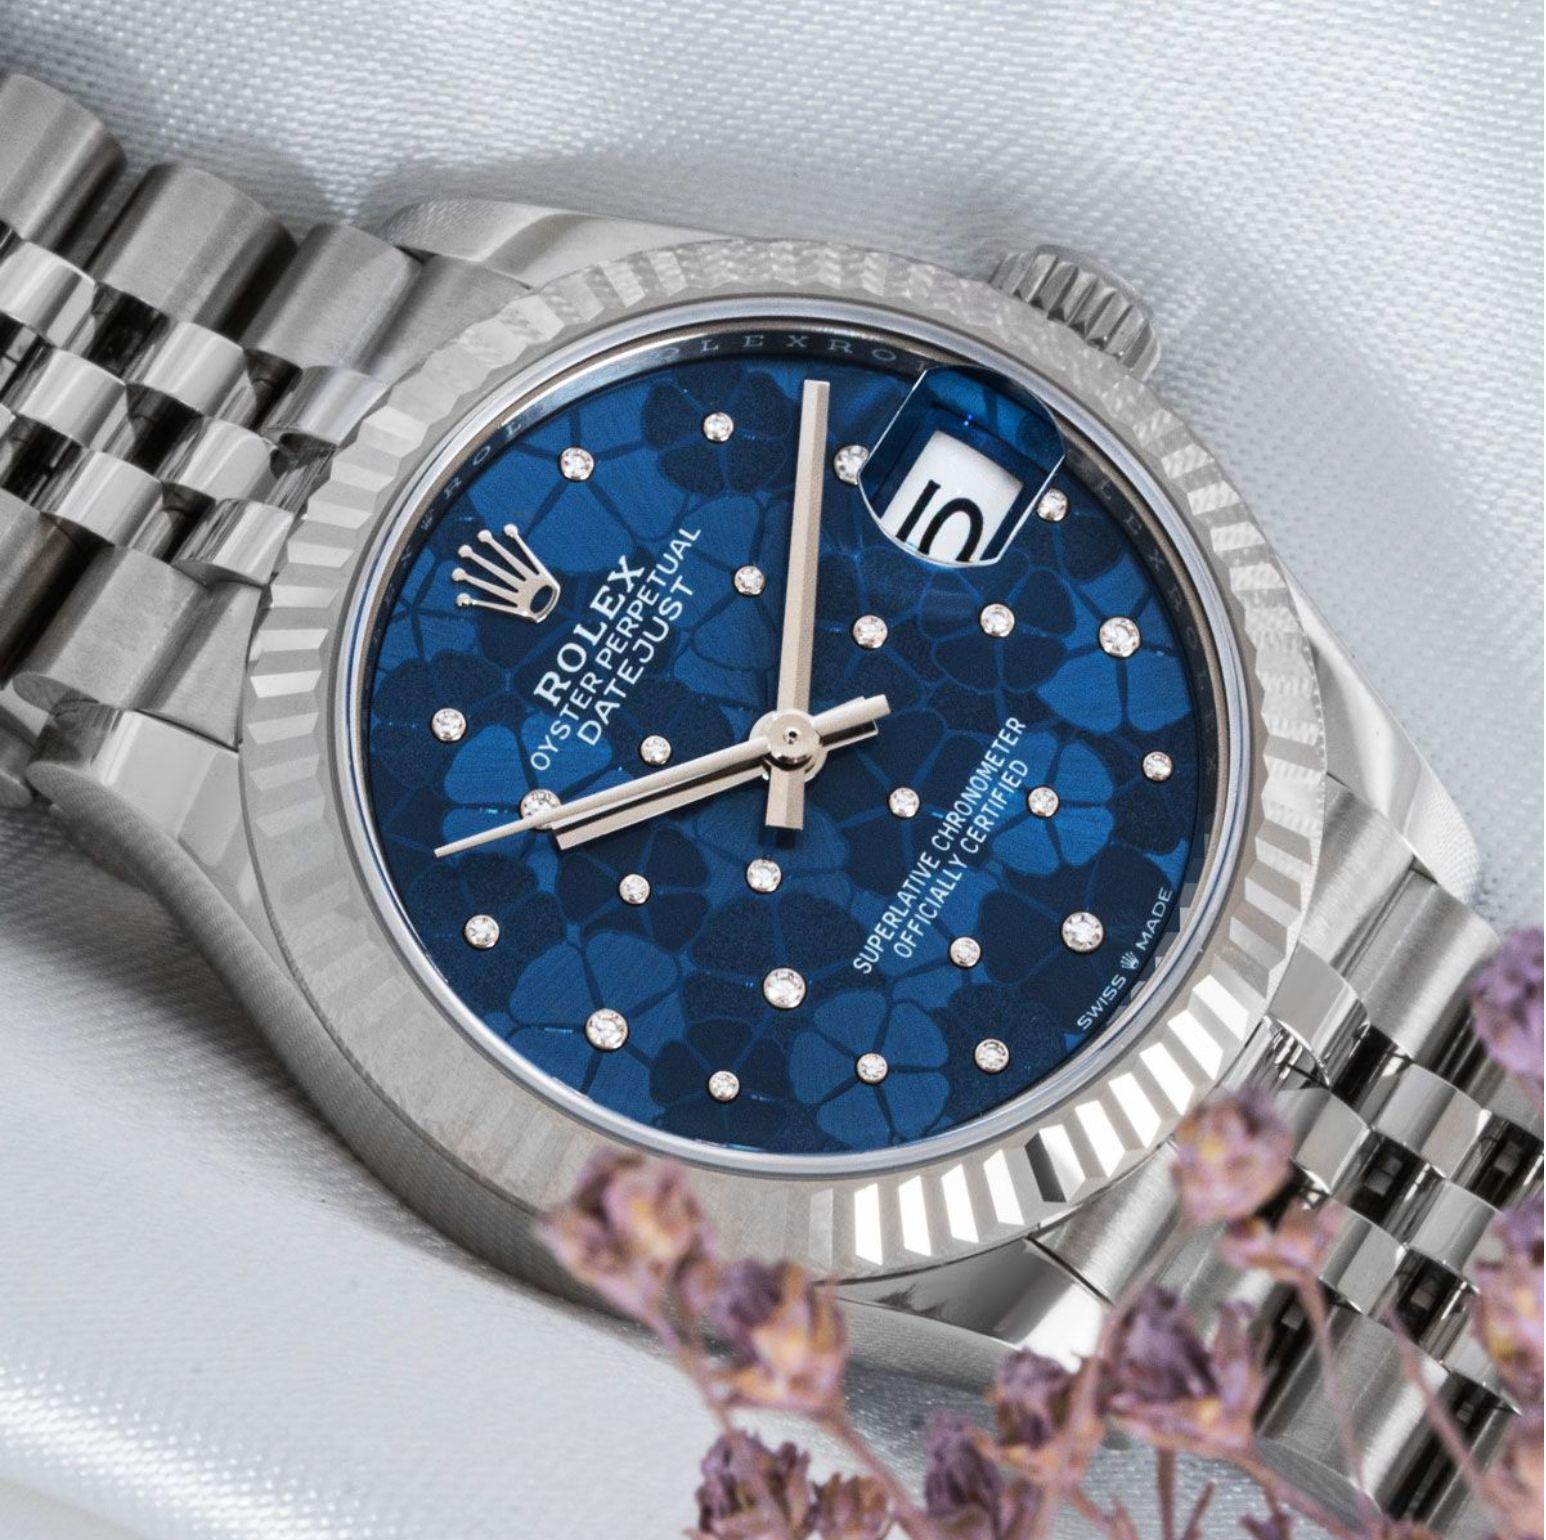 A stainless steel 31mm Datejust by Rolex. Featuring a blue floral motif diamond-set dial and a white gold fluted bezel. The steel Jubilee bracelet is equipped with a concealed folding Crownclasp. Fitted with a scratch-resistant sapphire crystal and